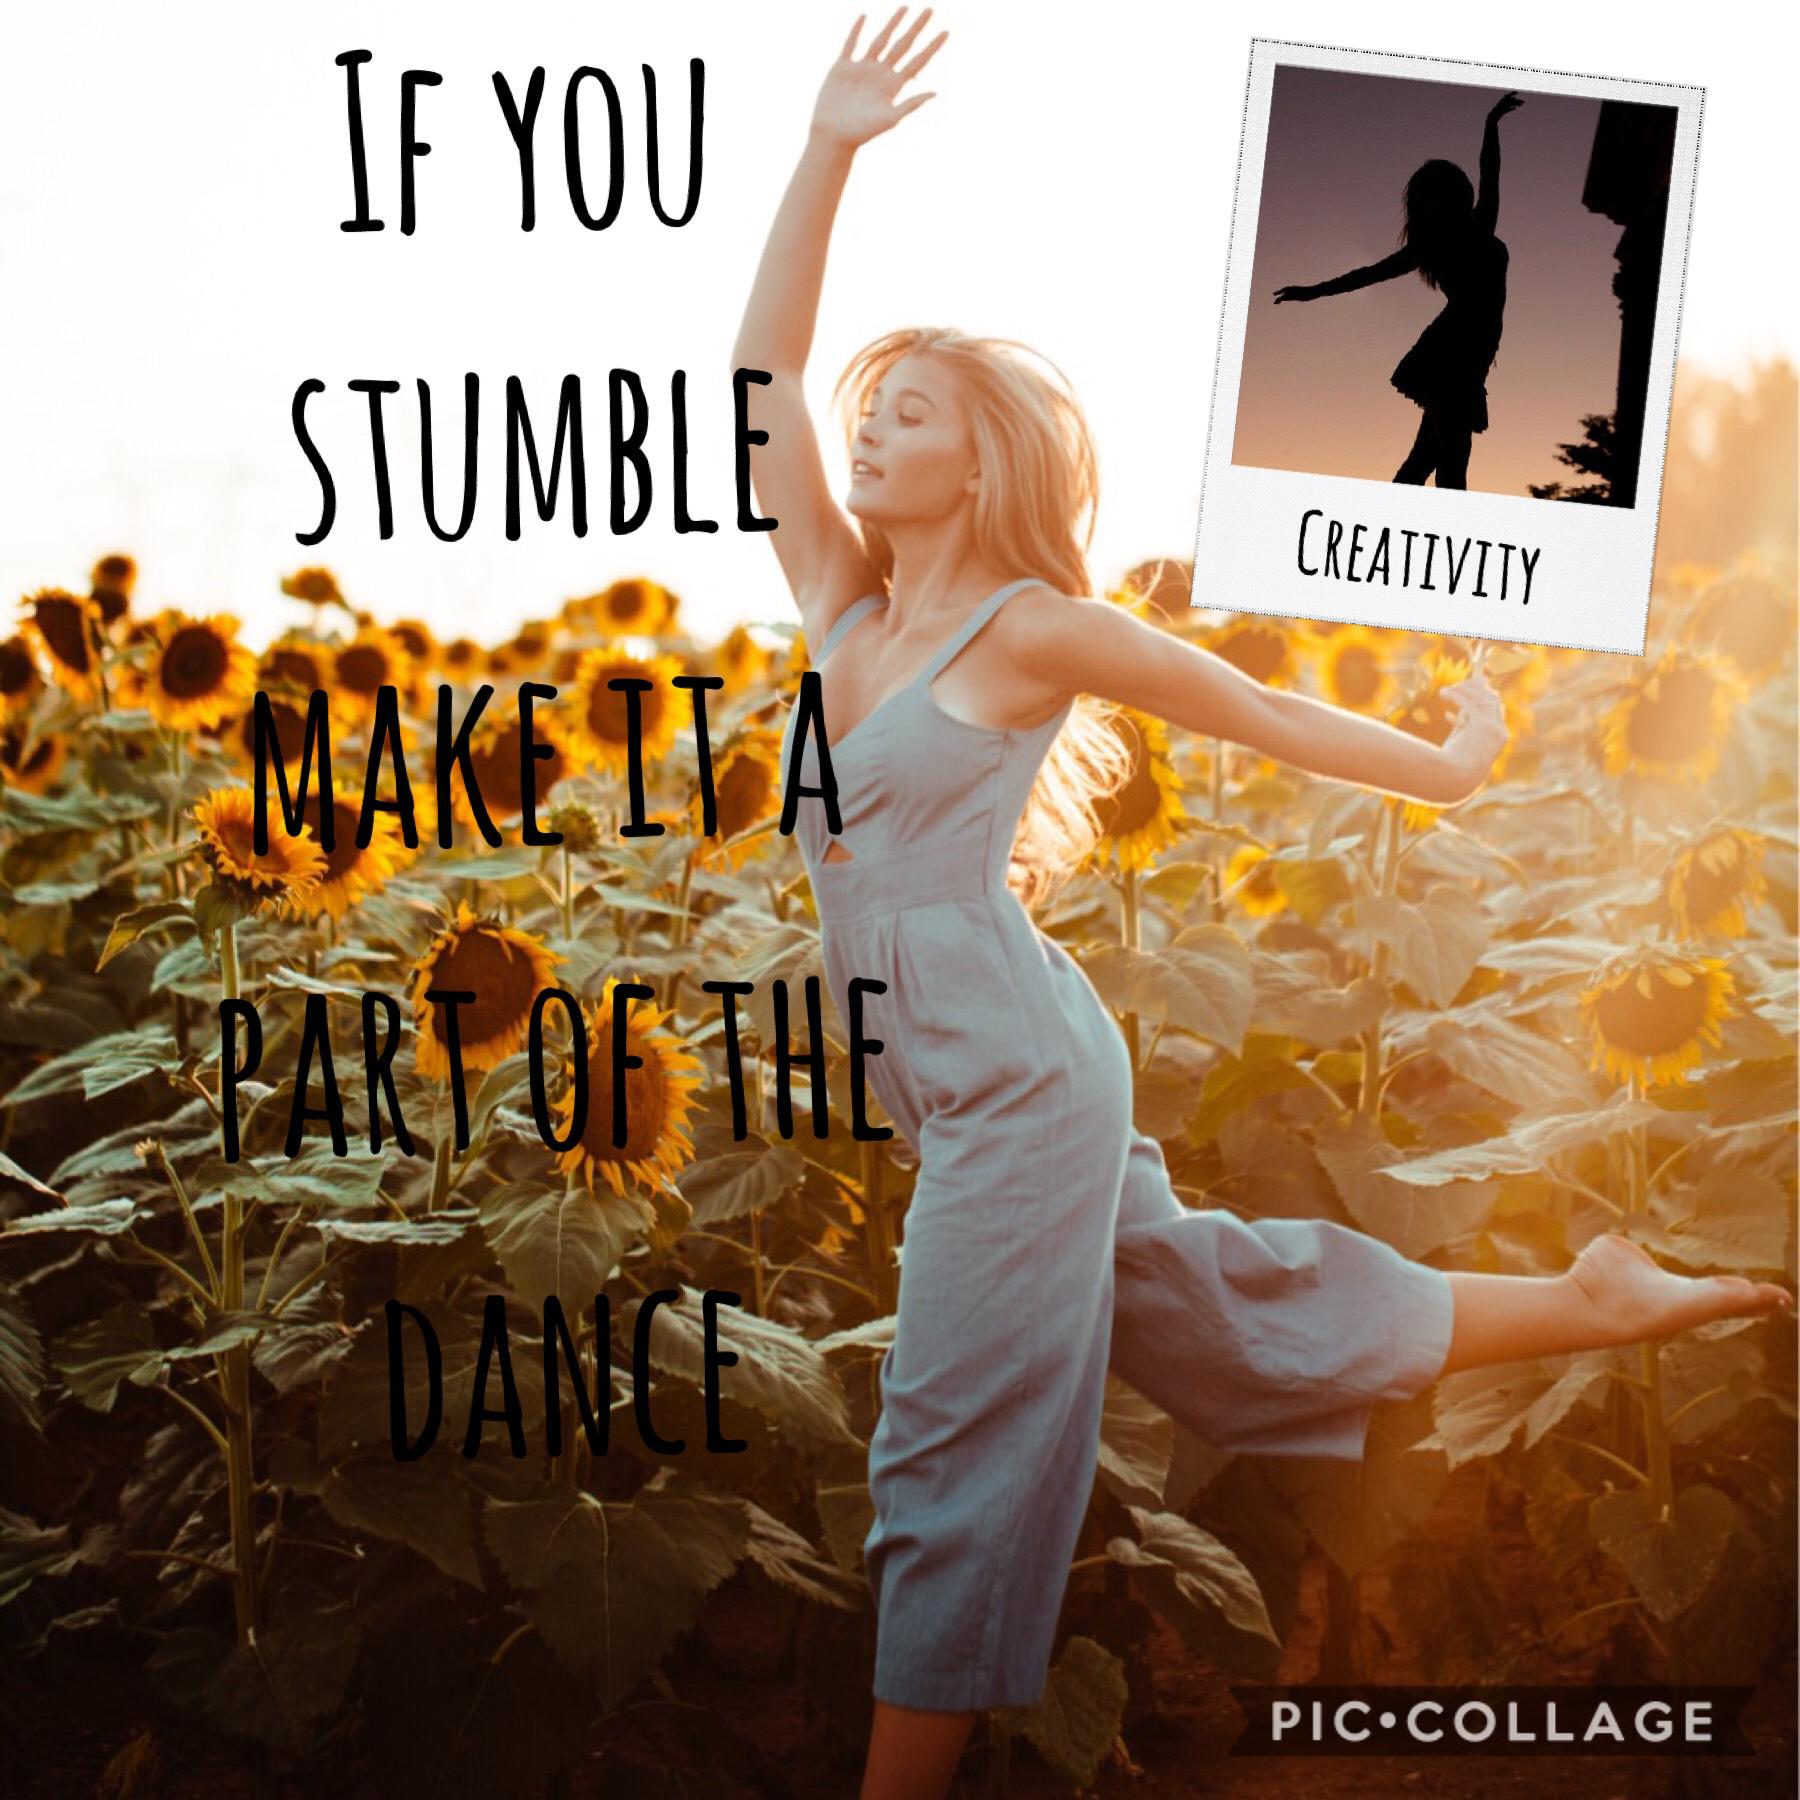 If you stumble make it part of the dance 